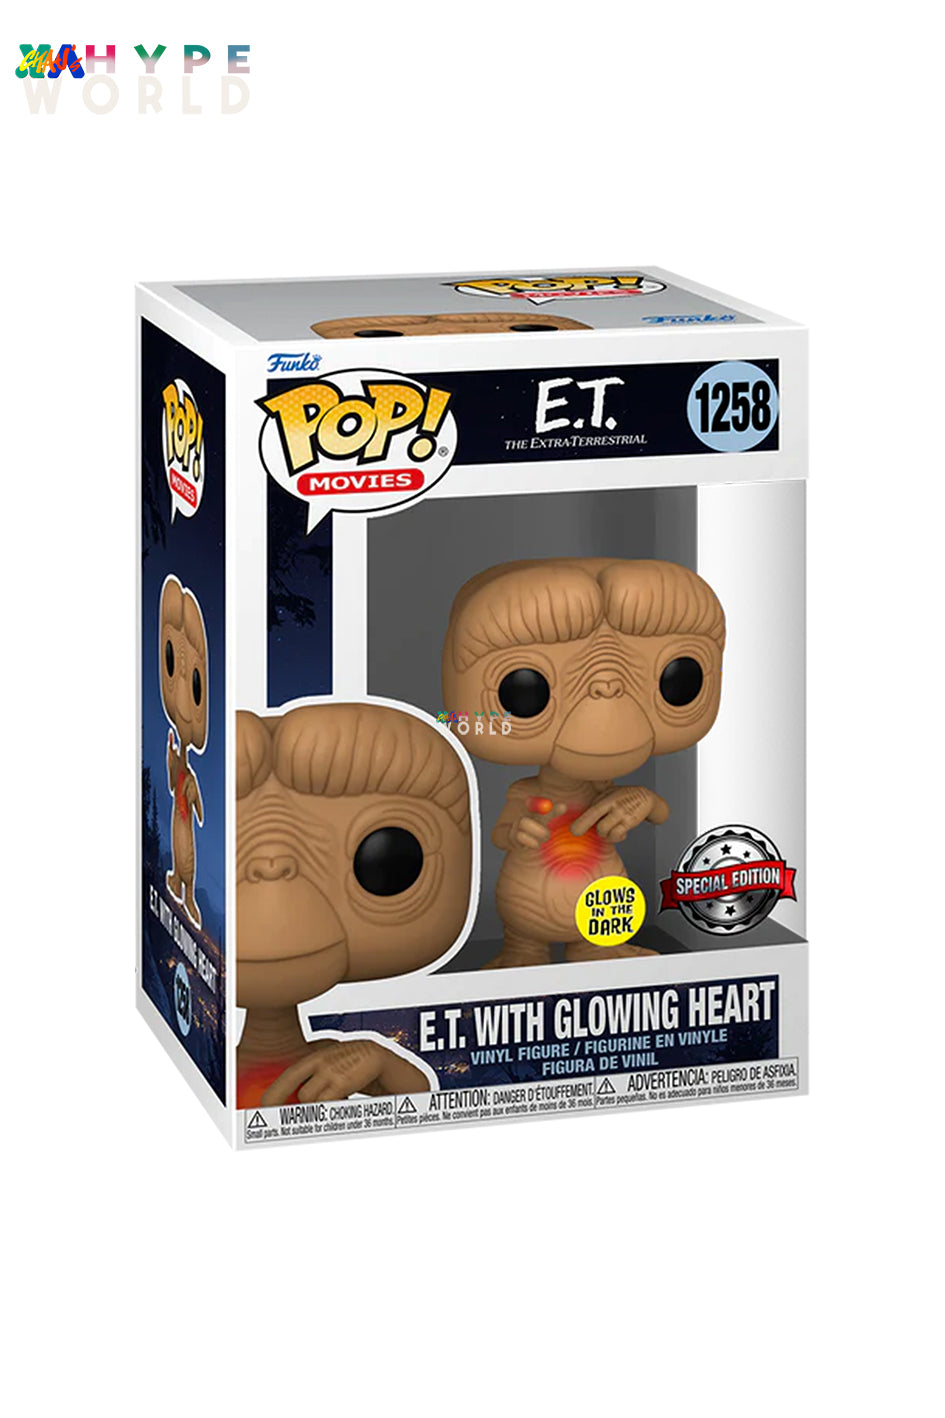 E.T. THE EXTRA-TERRESTRIAL - E.T. WITH GLOWING HEART 1258 (Special Edition) [Foldable Protector]